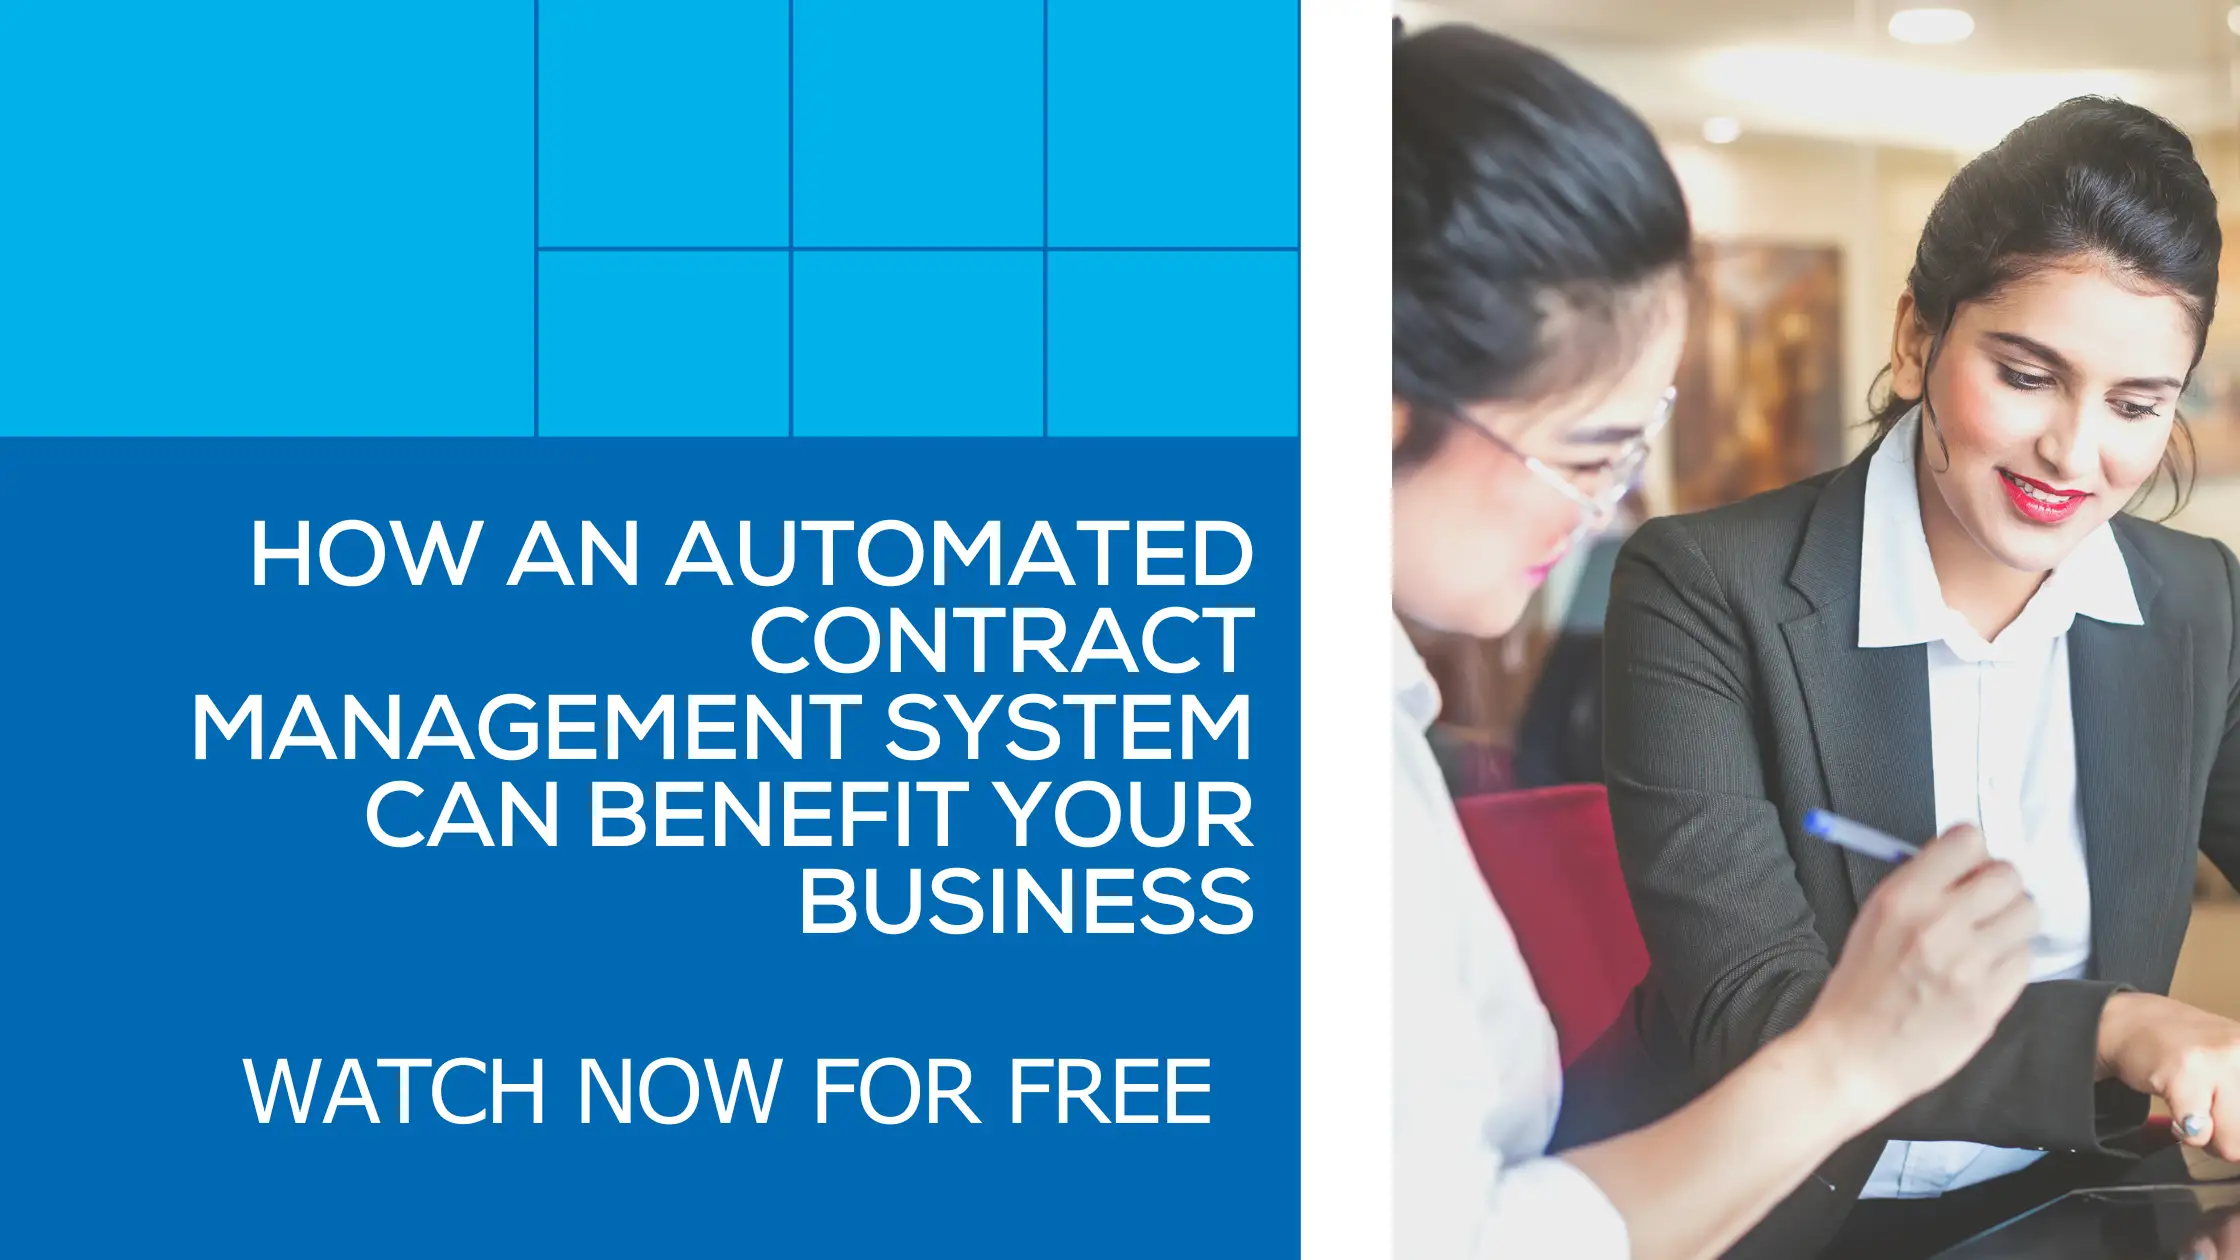 Webinar -How an Automated Contract Management System Can Benefit Your Business